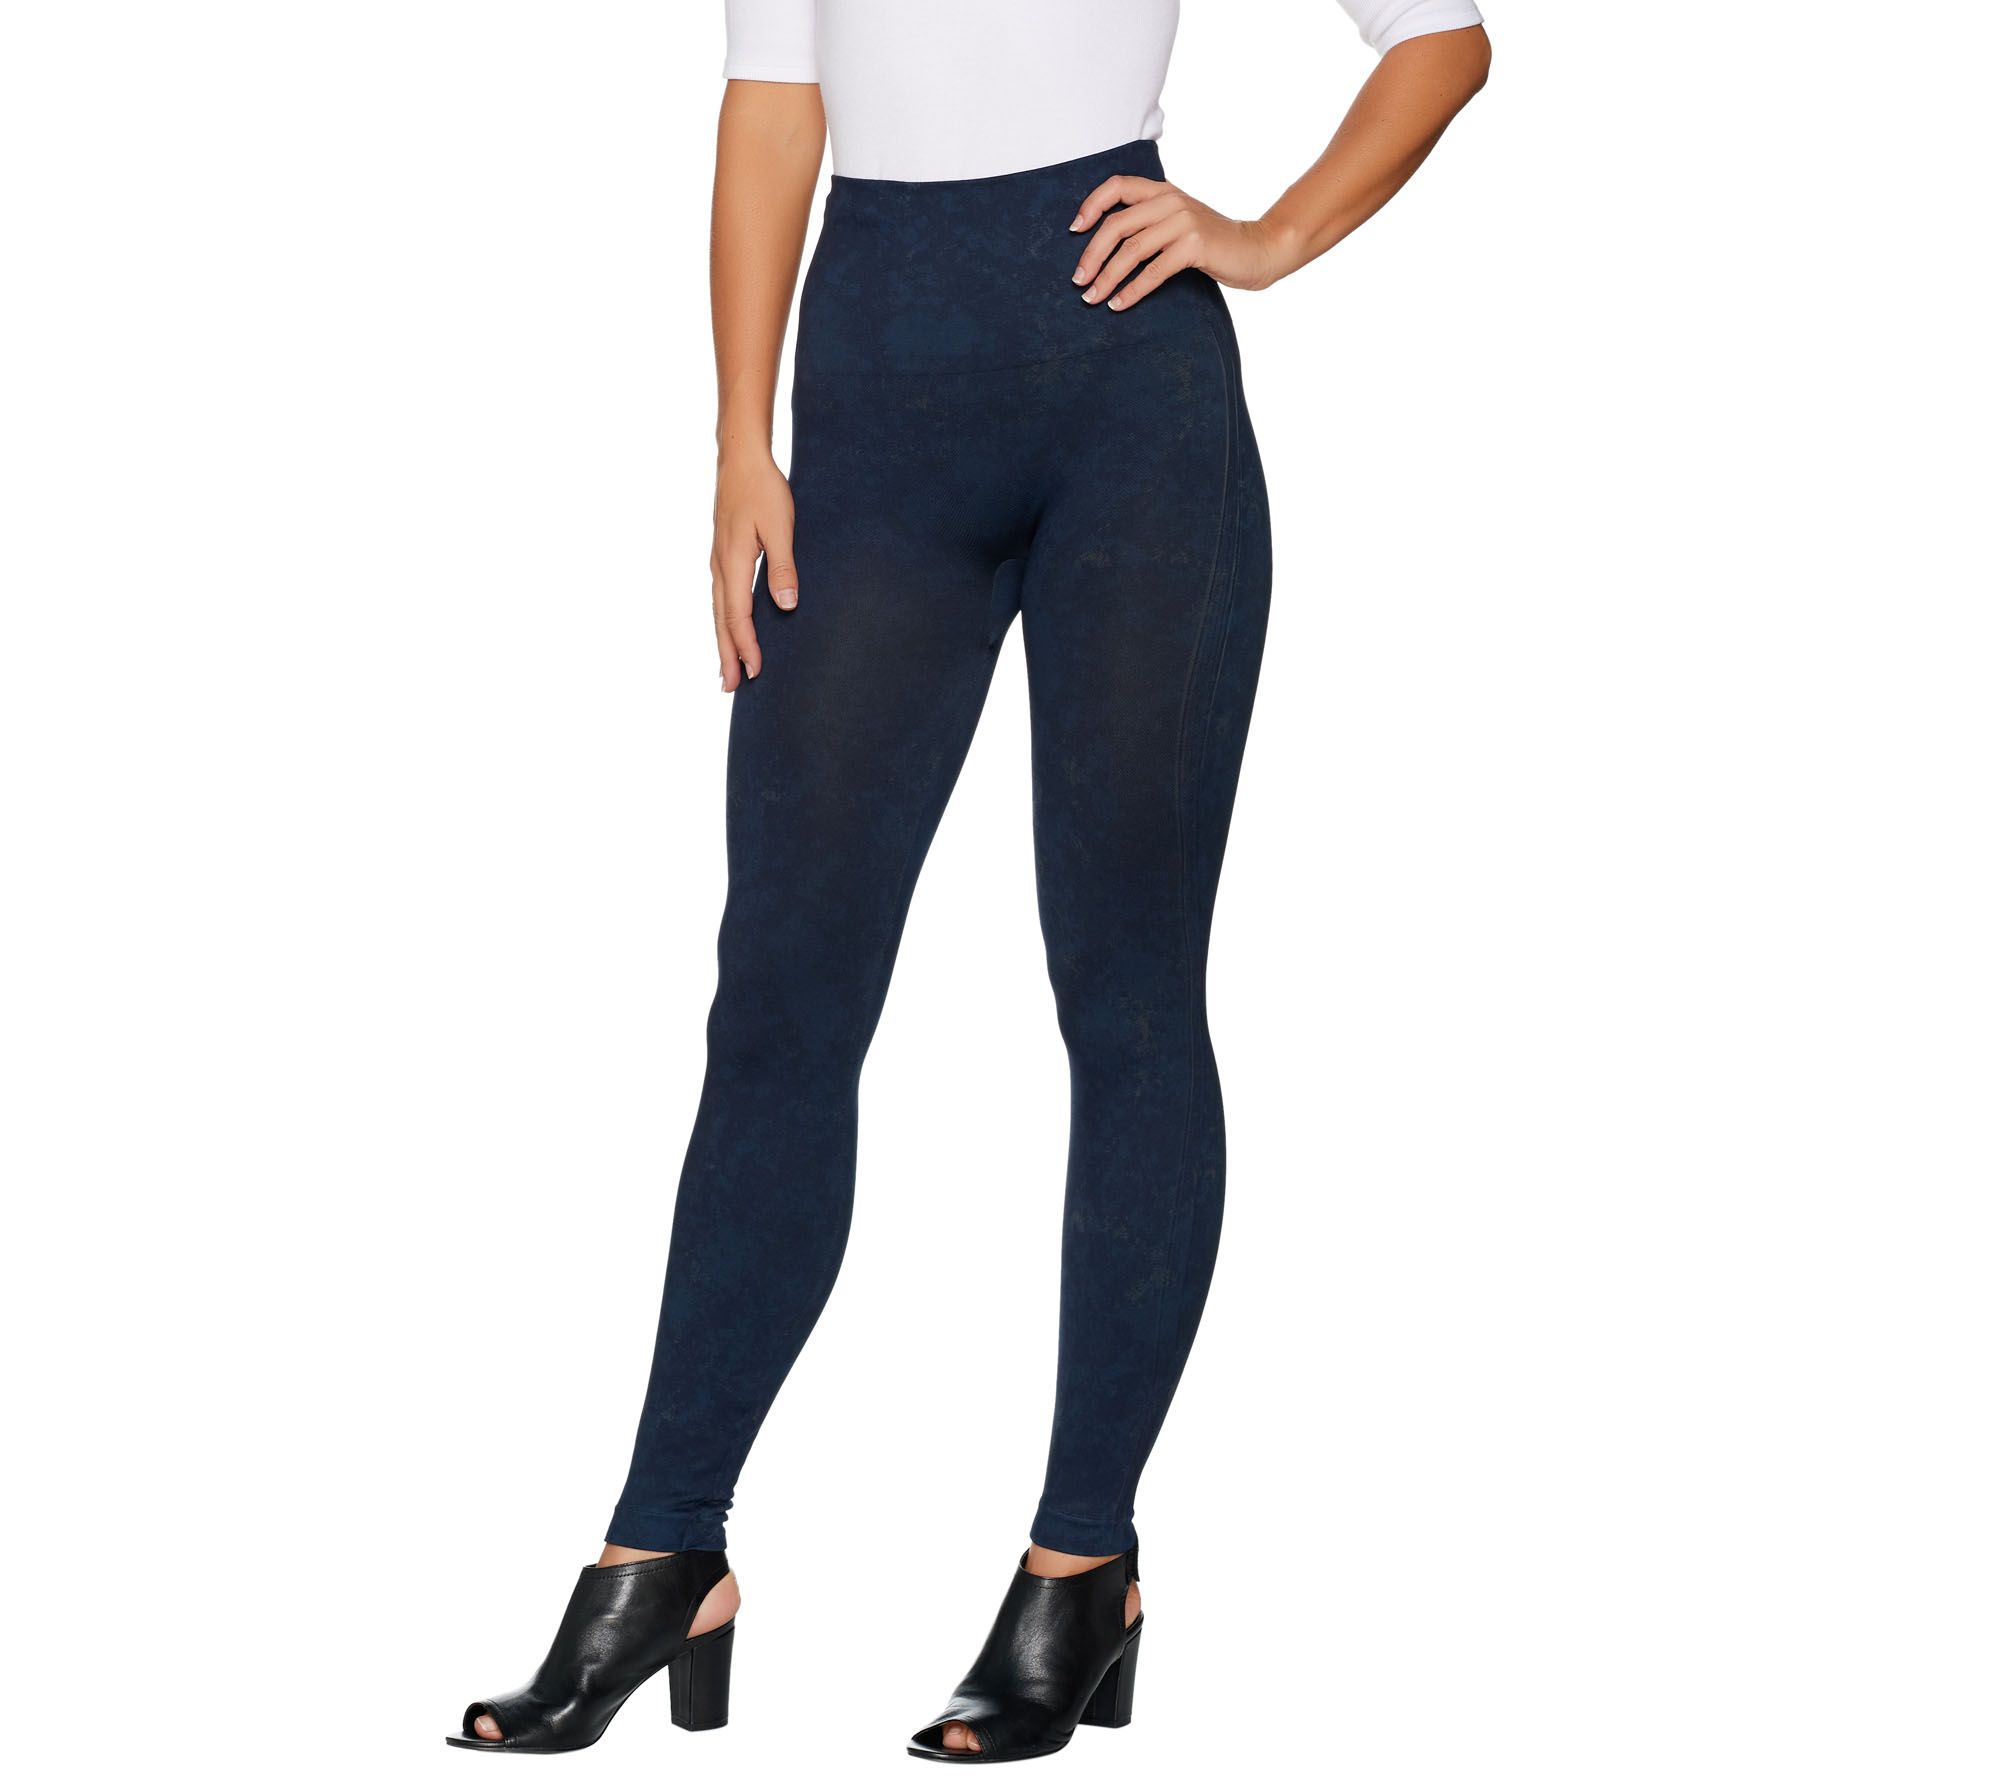 Spanx© LOOK AT ME NOW SEAMLESS LEGGING